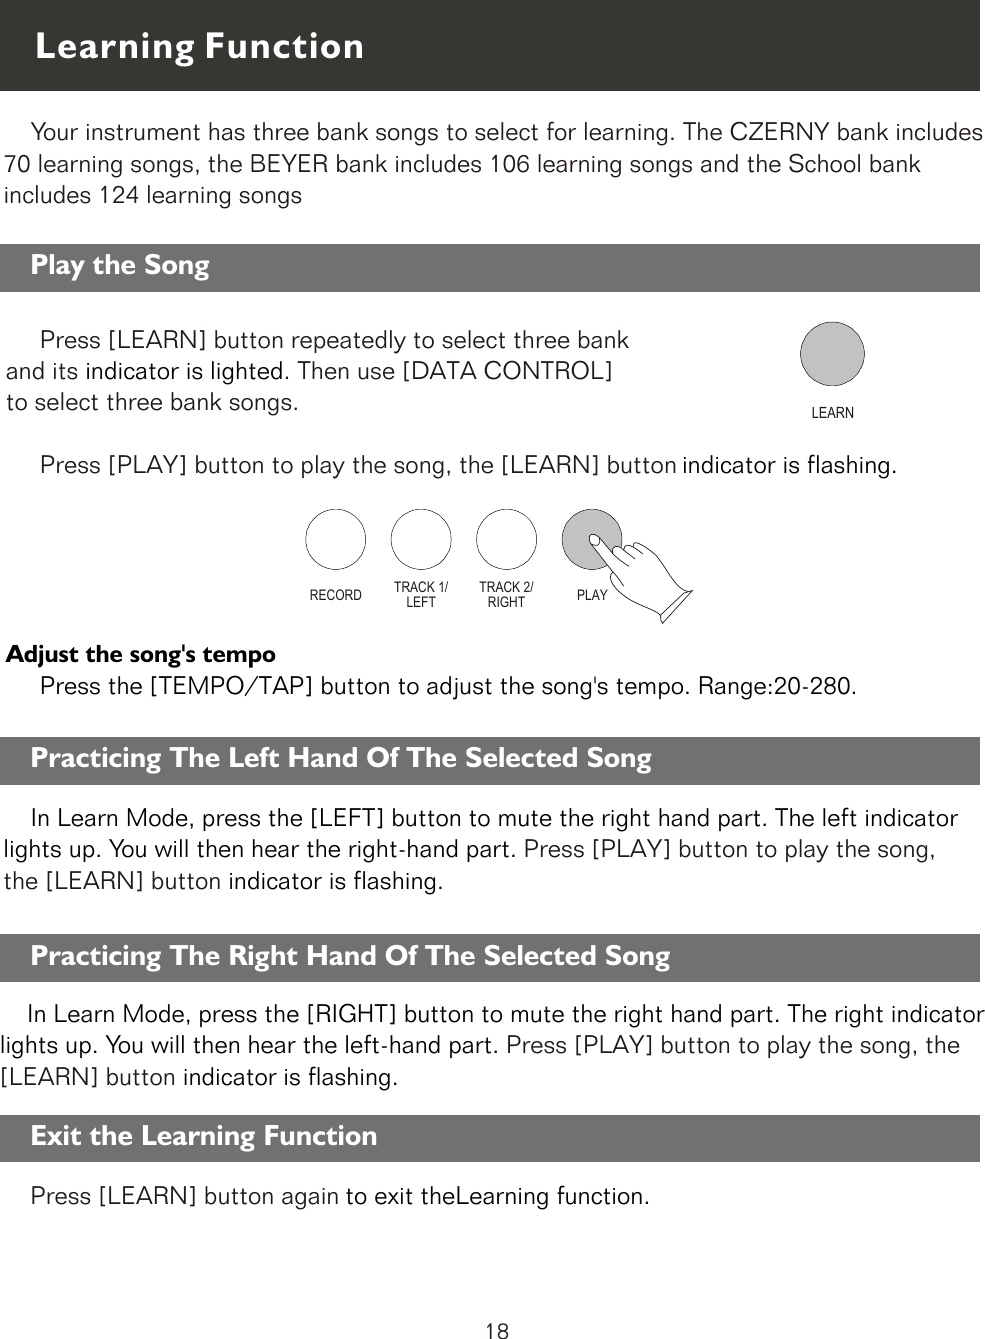 LEARN    Your instrument has three bank songs to select for learning. The CZERNY bank includes 70 learning songs, the BEYER bank includes 106 learning songs and the School bank includes 124 learning songsRECORD TRACK 1/LEFTTRACK 2/RIGHT PLAYLearning Function    In Learn Mode, press the [LEFT] button to mute the right hand part. The left indicator lights up. You will then hear the right-hand part. indicator is flashing.Press [PLAY] button to play the song, the [LEARN] button   Play the Song     Press [LEARN] button repeatedly to select three bank and its  . Then use [DATA CONTROL] to select three bank songs.      Press [PLAY] button to play the song, the [LEARN] button   indicator is lightedindicator is flashing.     Adjust the song&apos;s tempo     Press the [TEMPO/TAP] button to adjust the song&apos;s tempo. Range:20-280.Practicing The Left Hand Of The Selected Song    In Learn Mode, press the [RIGHT] button to mute the right hand part. The right indicator lights up. You will then hear the left-hand part. indicator is flashing.     Press [PLAY] button to play the song, the [LEARN] button   Practicing The Right Hand Of The Selected SongPress [LEARN] button again to exit theLearning function.Exit the Learning Function18